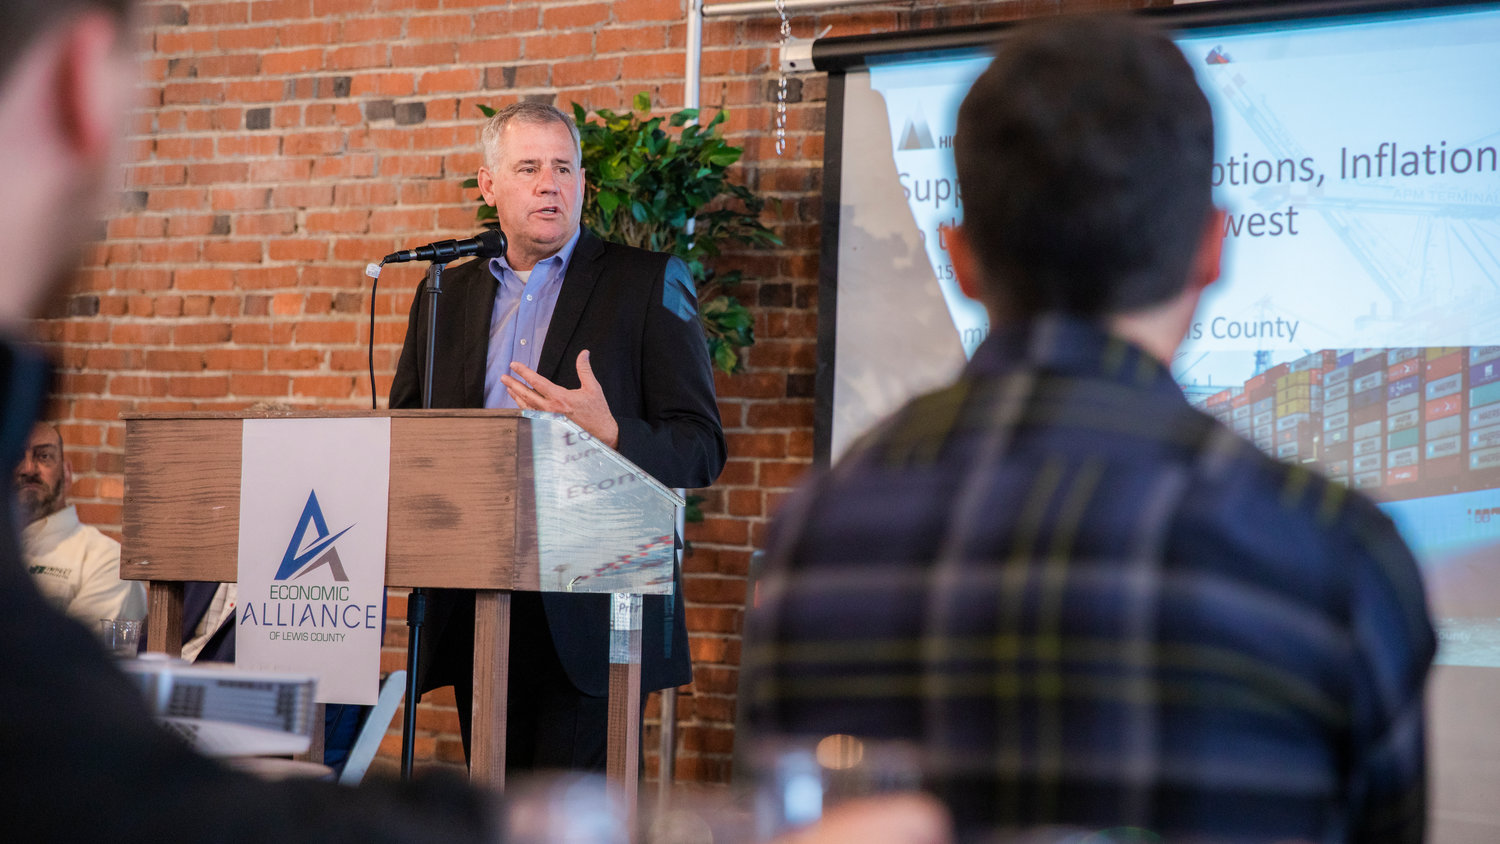 FILE PHOTO — Executive Director Richard DeBolt speaks to attendees inside The Loft for an Economic Alliance Summit event in Chehalis in June 2022.